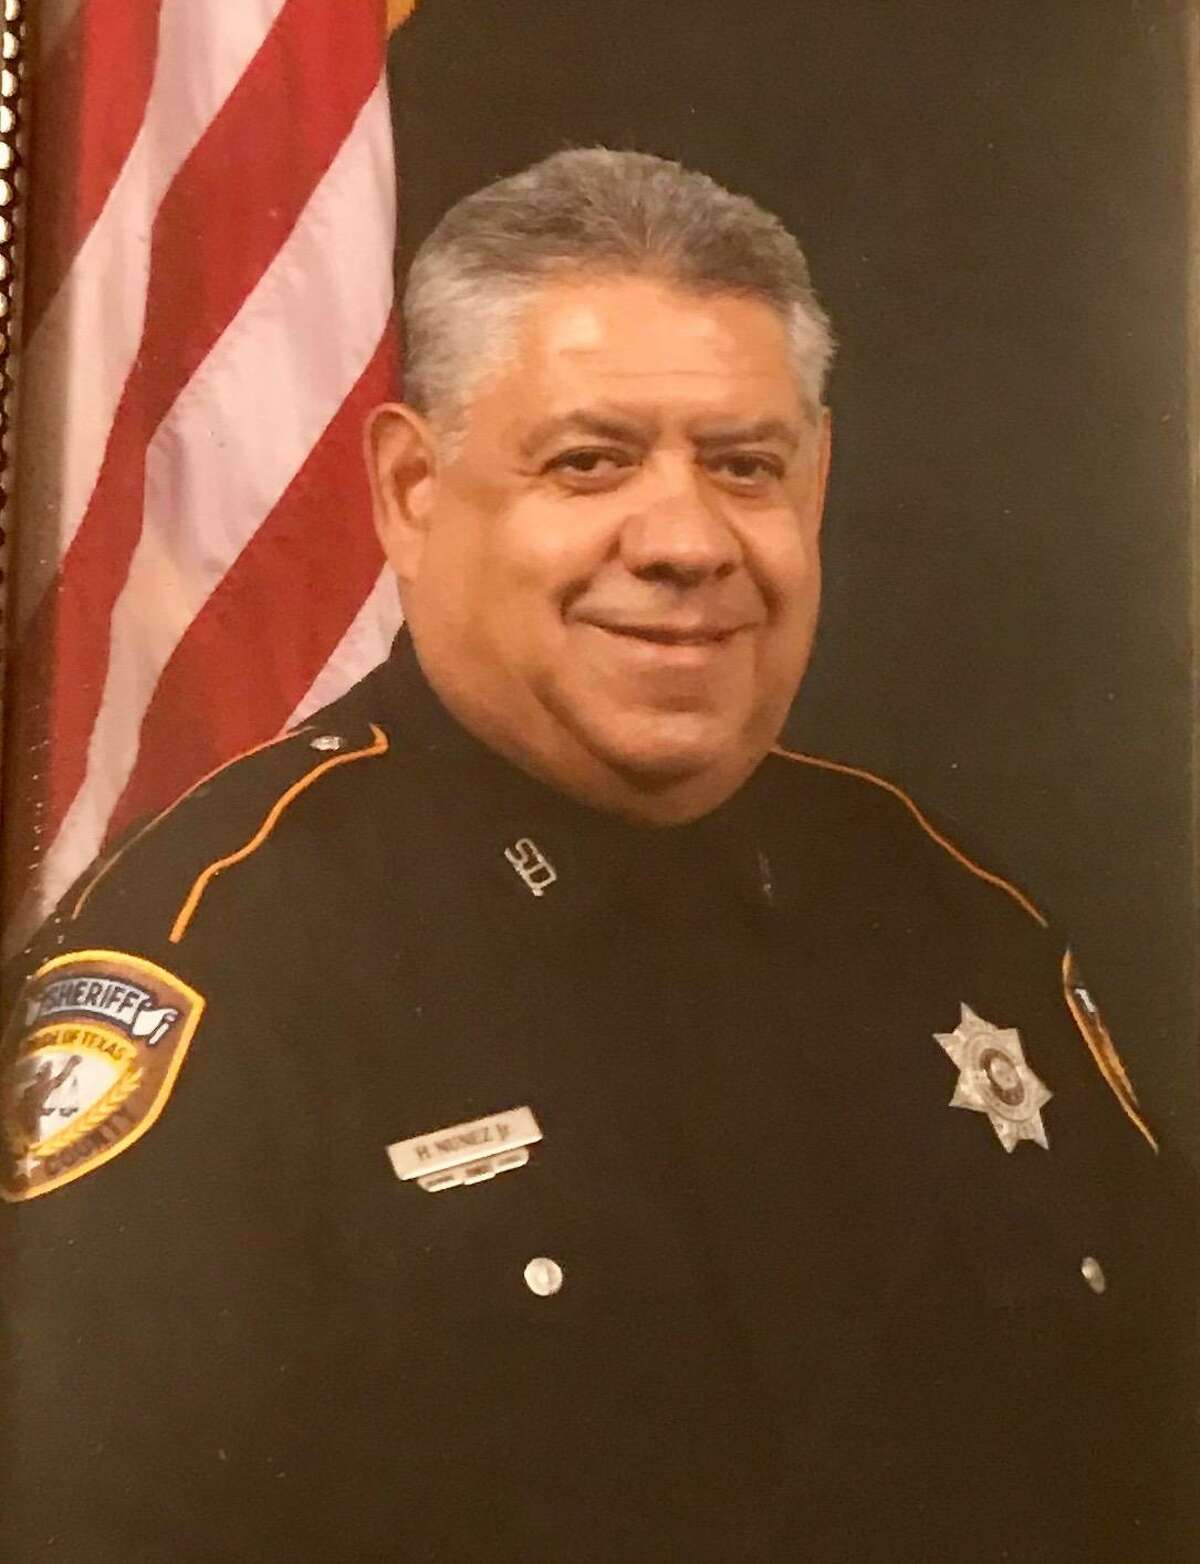 Hilbert Nuñez Jr, 68, is remembered for his compassionate demeanor in the courtroom as a longtime bailiff for the Harris County Sheriff's Office. He died April 11 of COVID-19 after returning from a trip to Egypt.